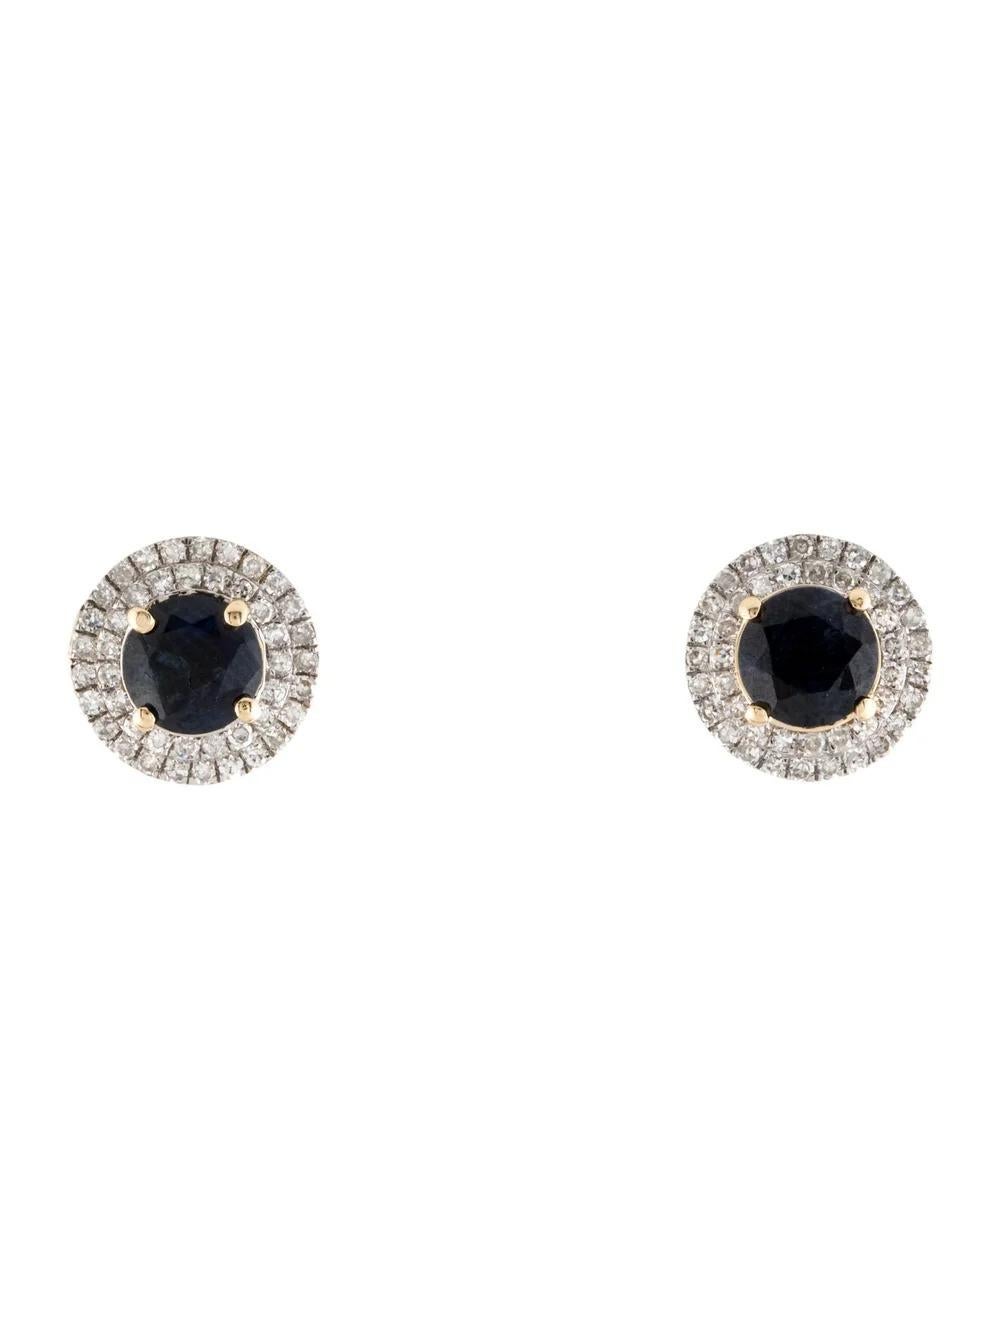 Elevate your elegance with these exquisite 14K Yellow Gold earrings, featuring two stunning Round Brilliant Sapphires totaling 1.92 carats. The deep blue hue of the sapphires is complemented by 88 dazzling Diamonds, totaling 0.44 carats, set in a